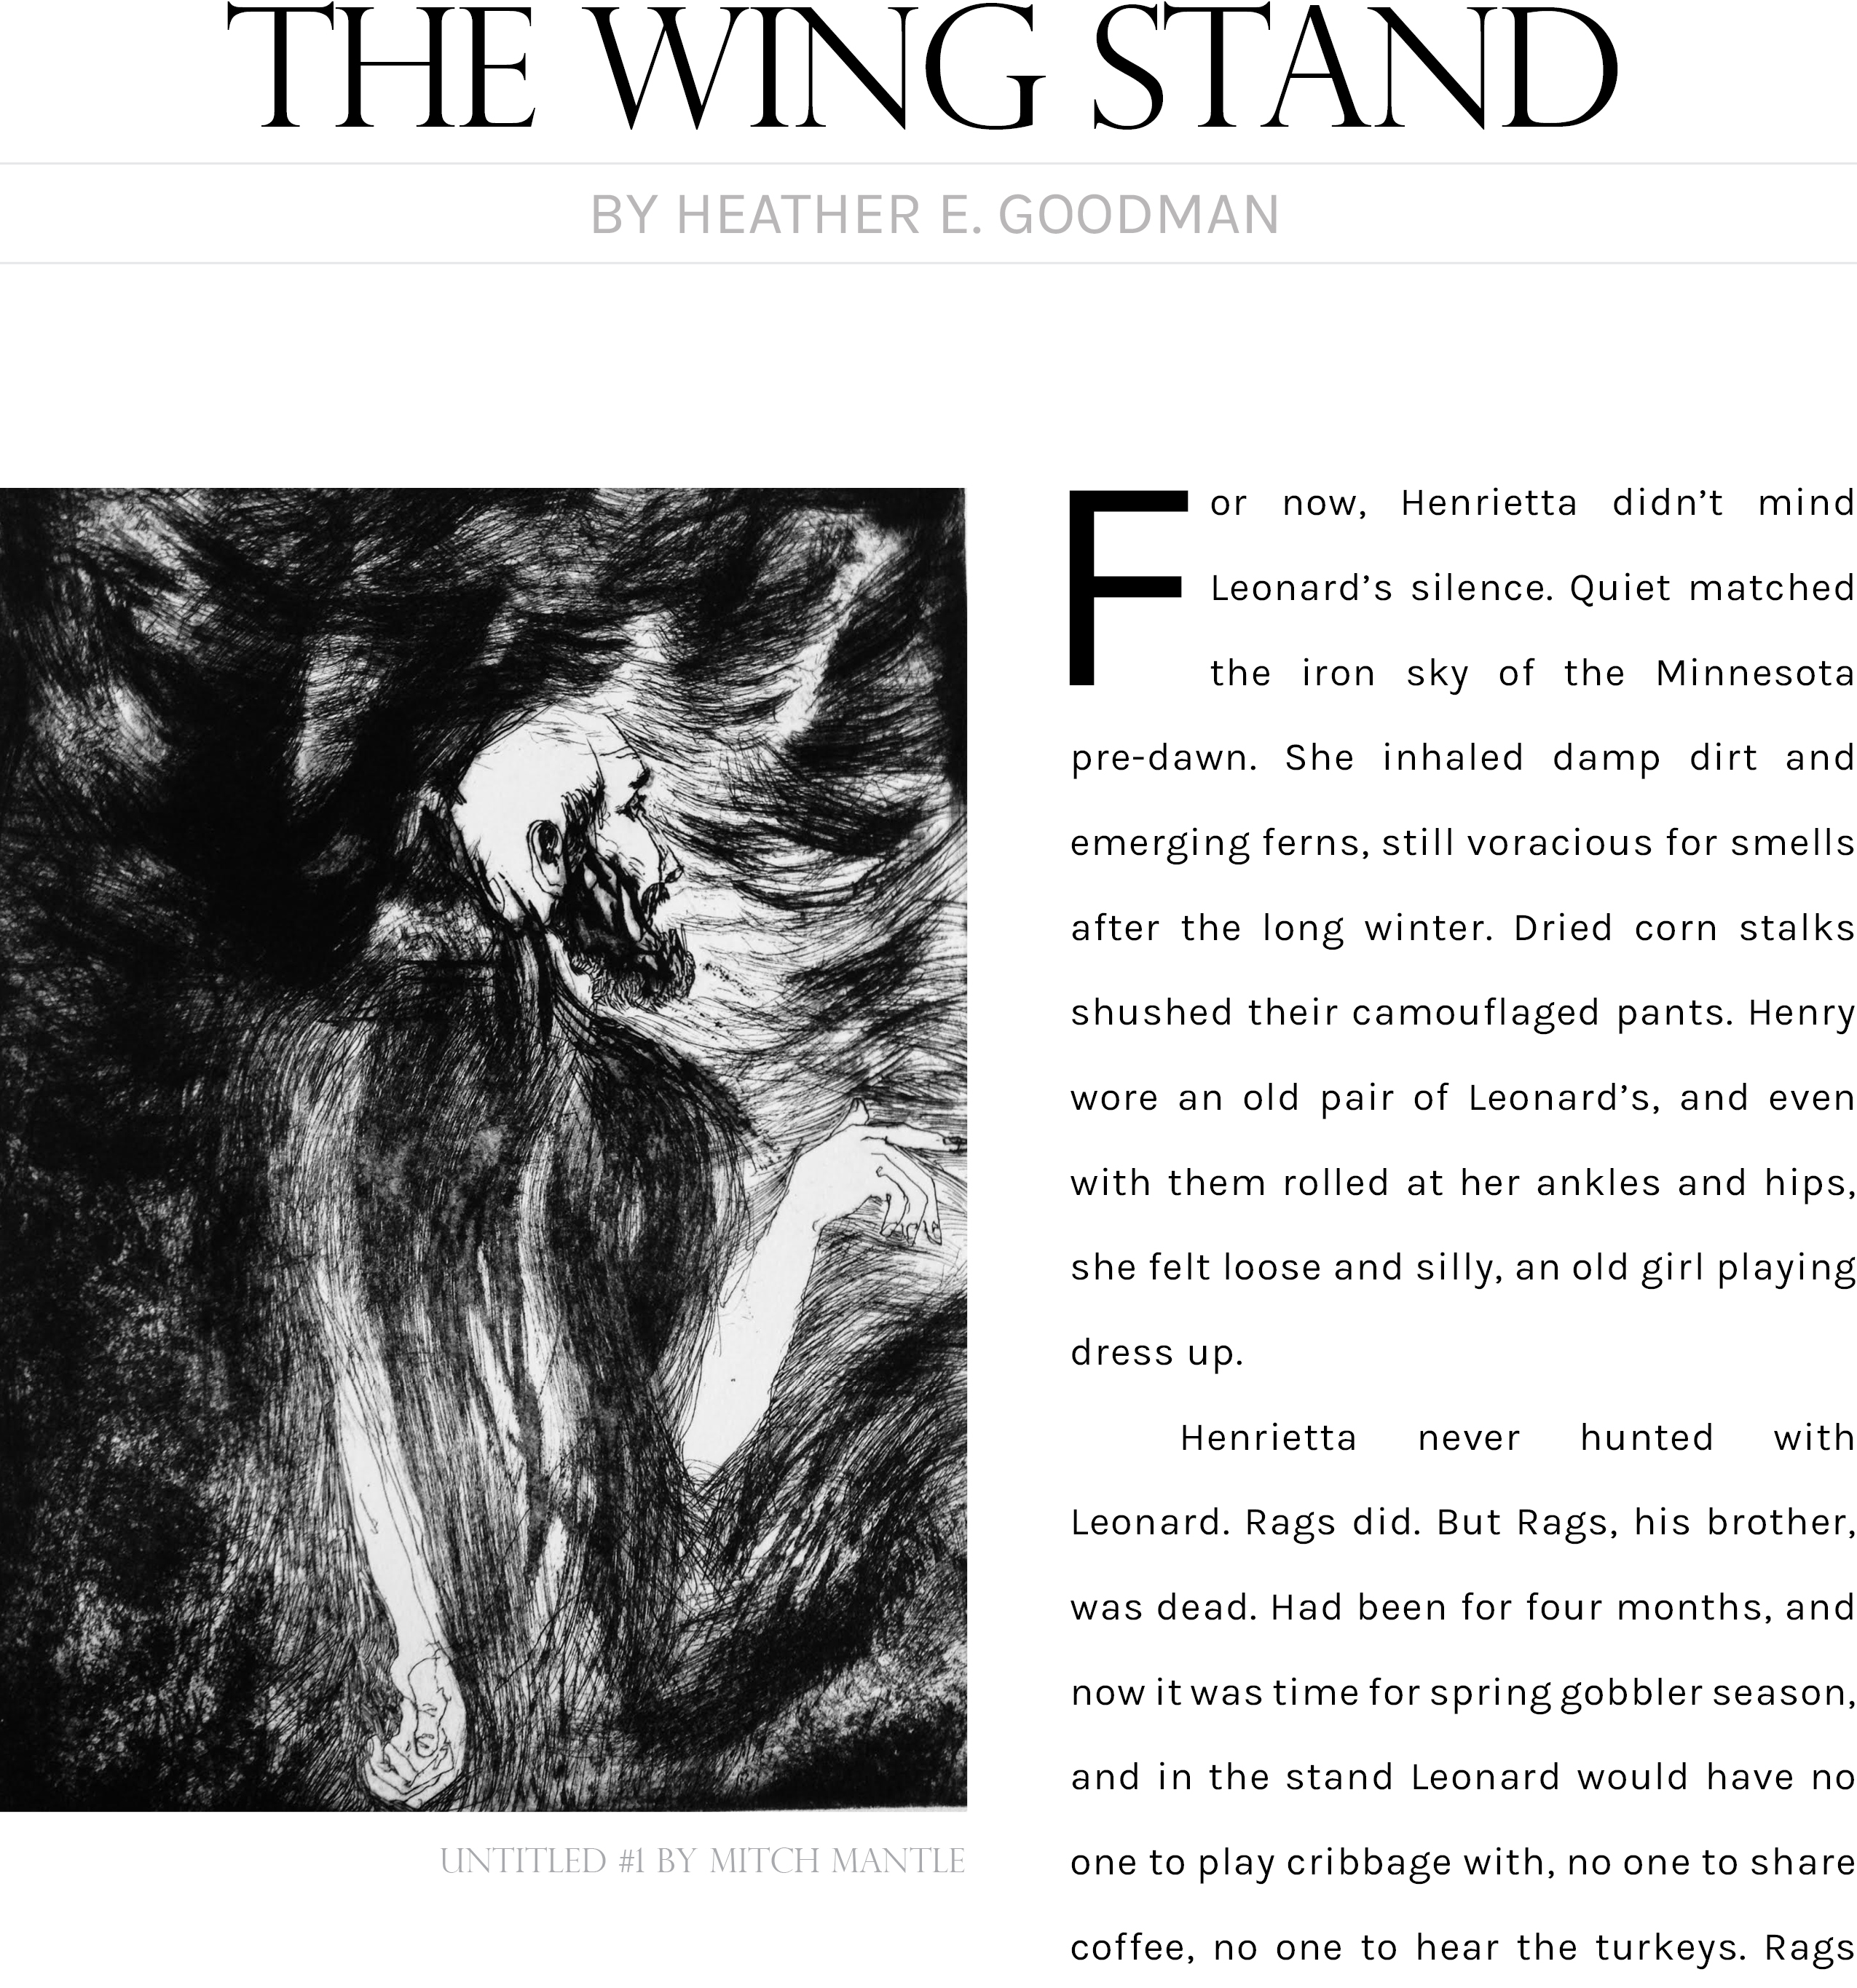 The Wingstand by Heather Goodman